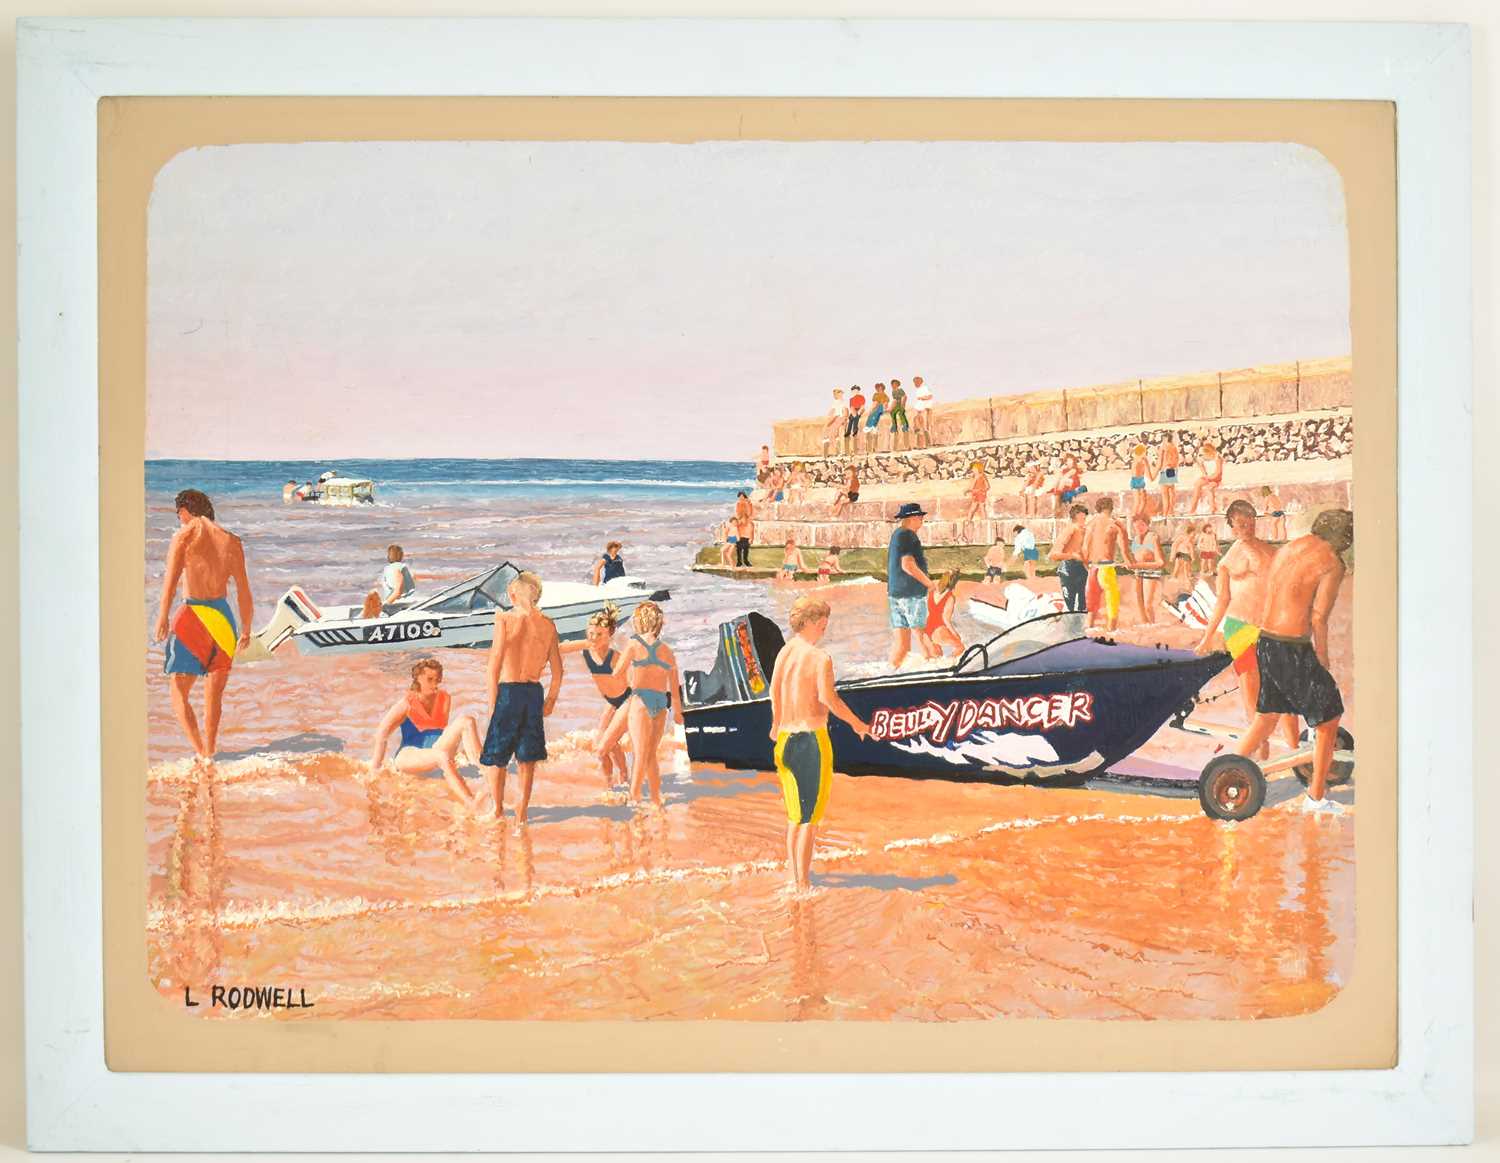 † LEONARD RODWELL, Blackpool, Sculptor/Artist (Died 2013); acrylic, the beach at the end of Square